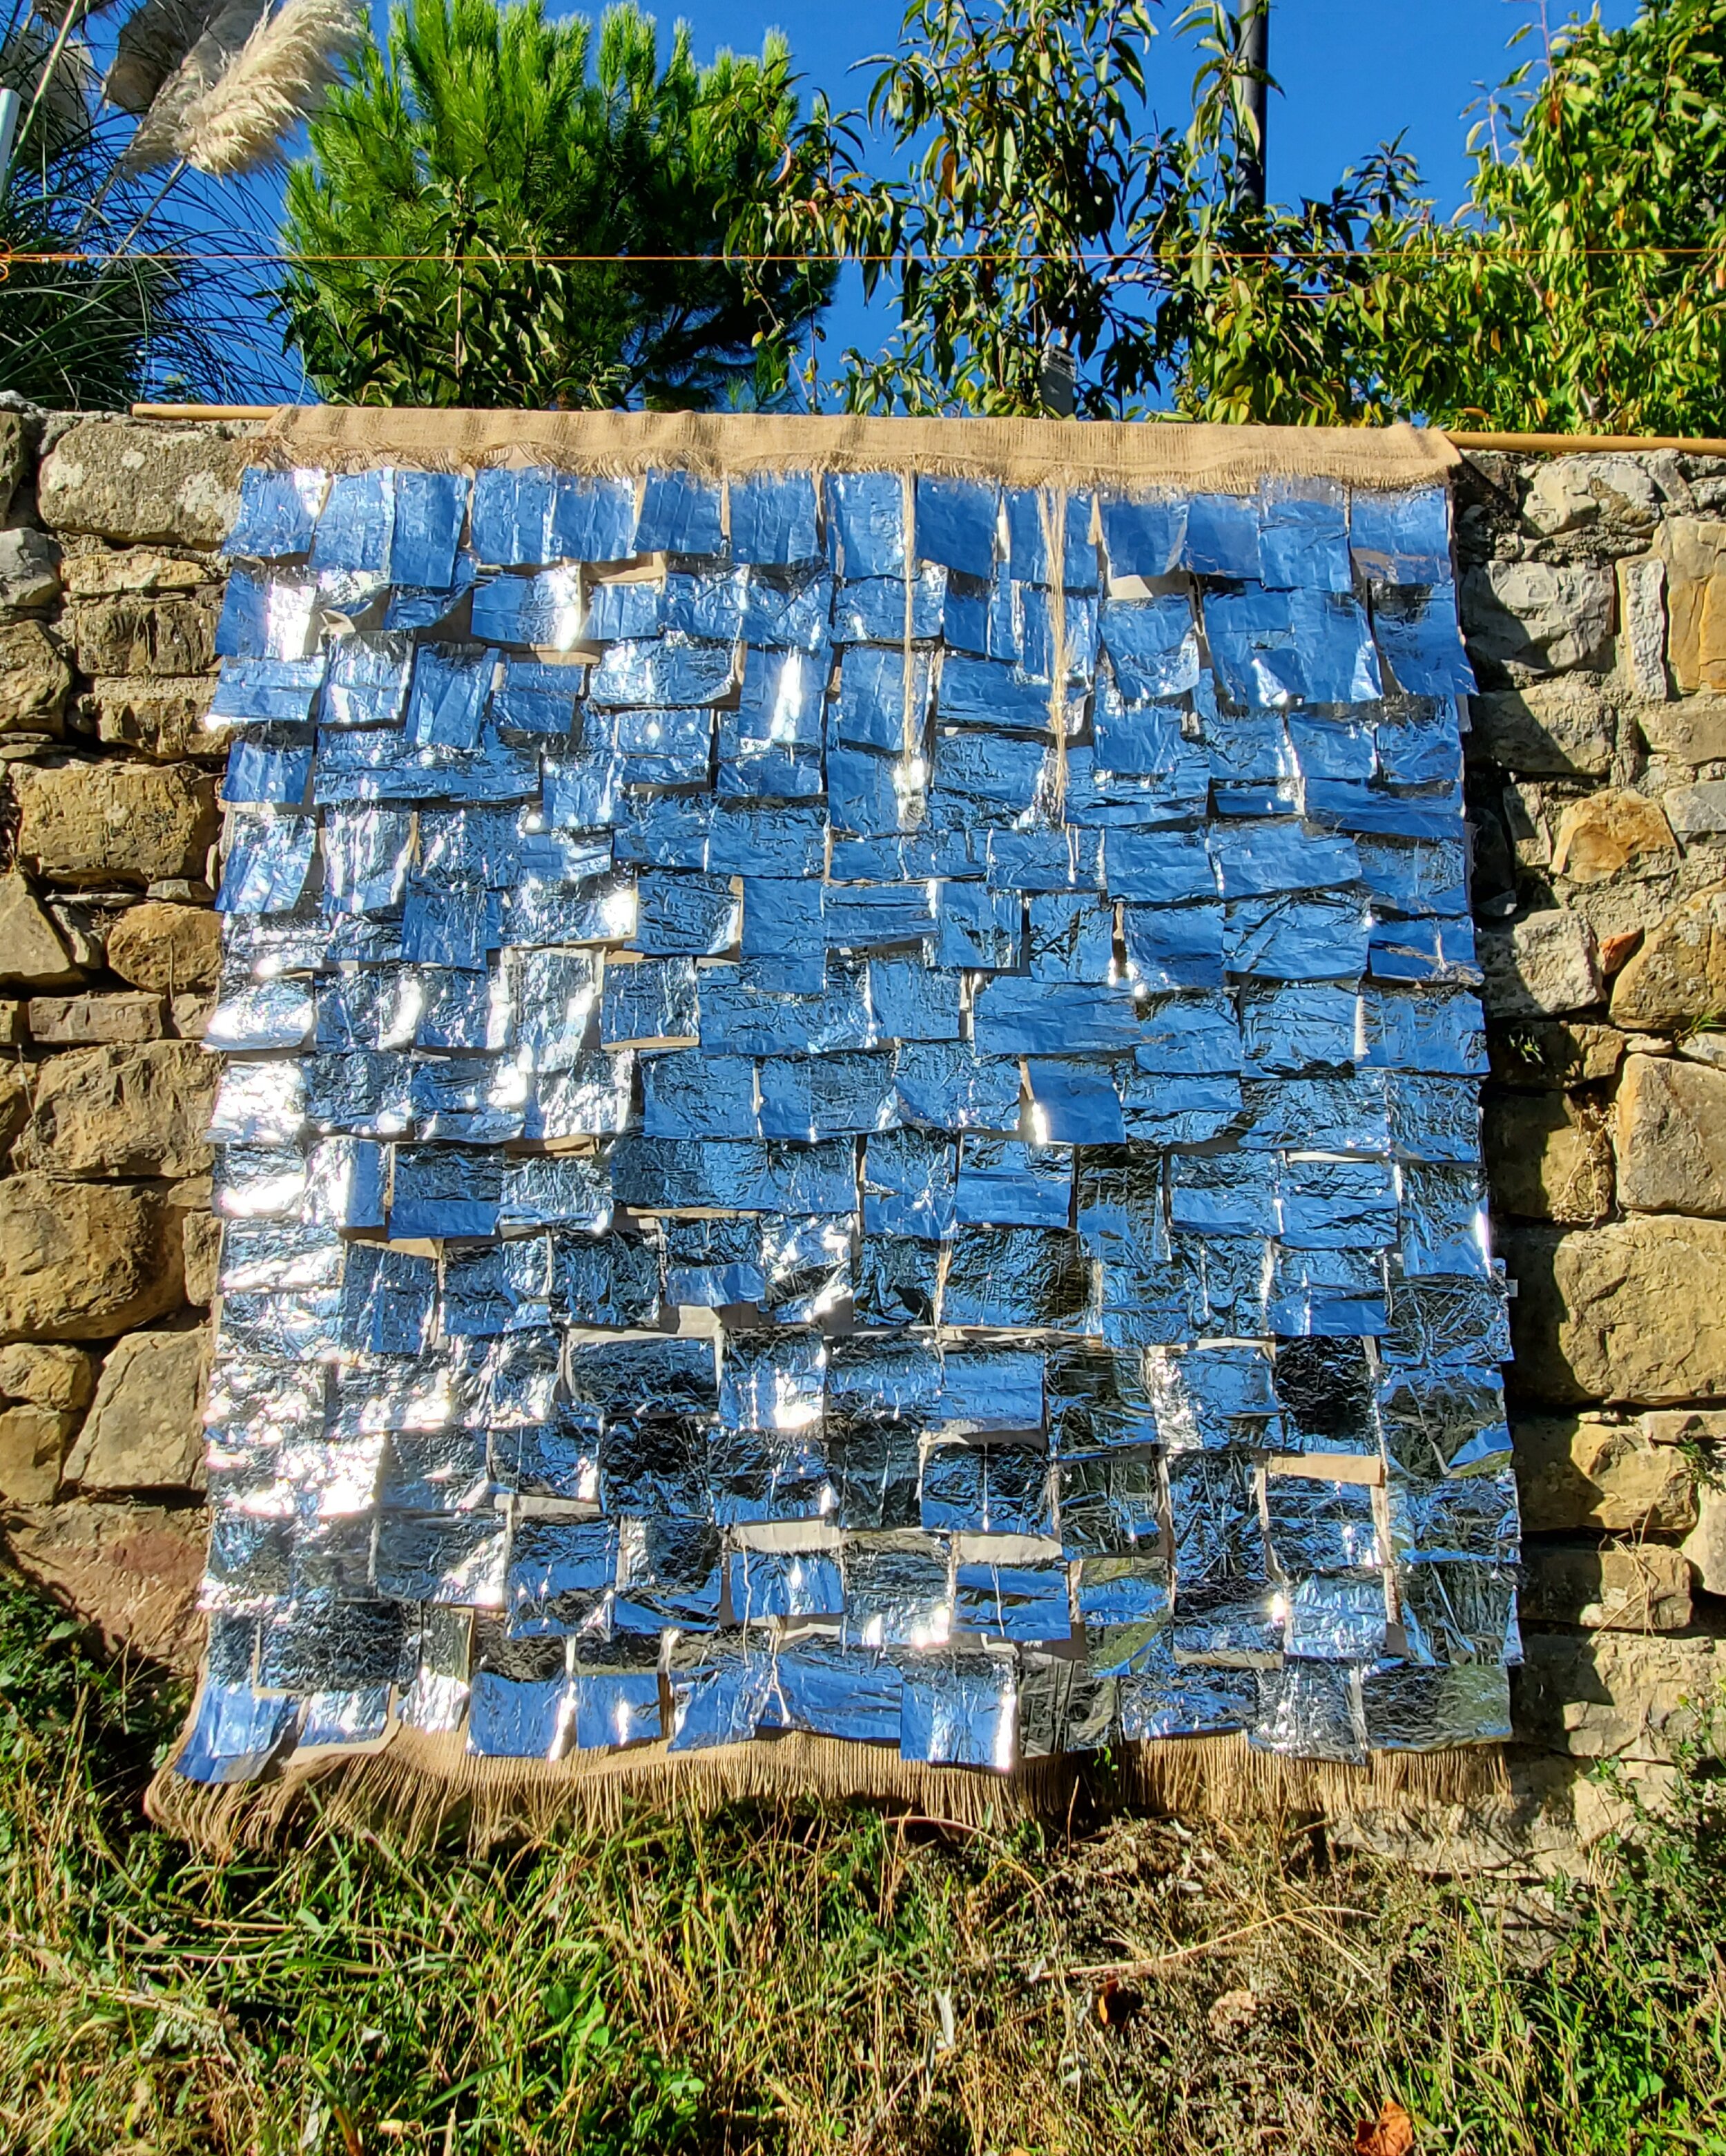 coperta per tutti (a blanket for everyone) 2019, shown with cerulean sky reflection 